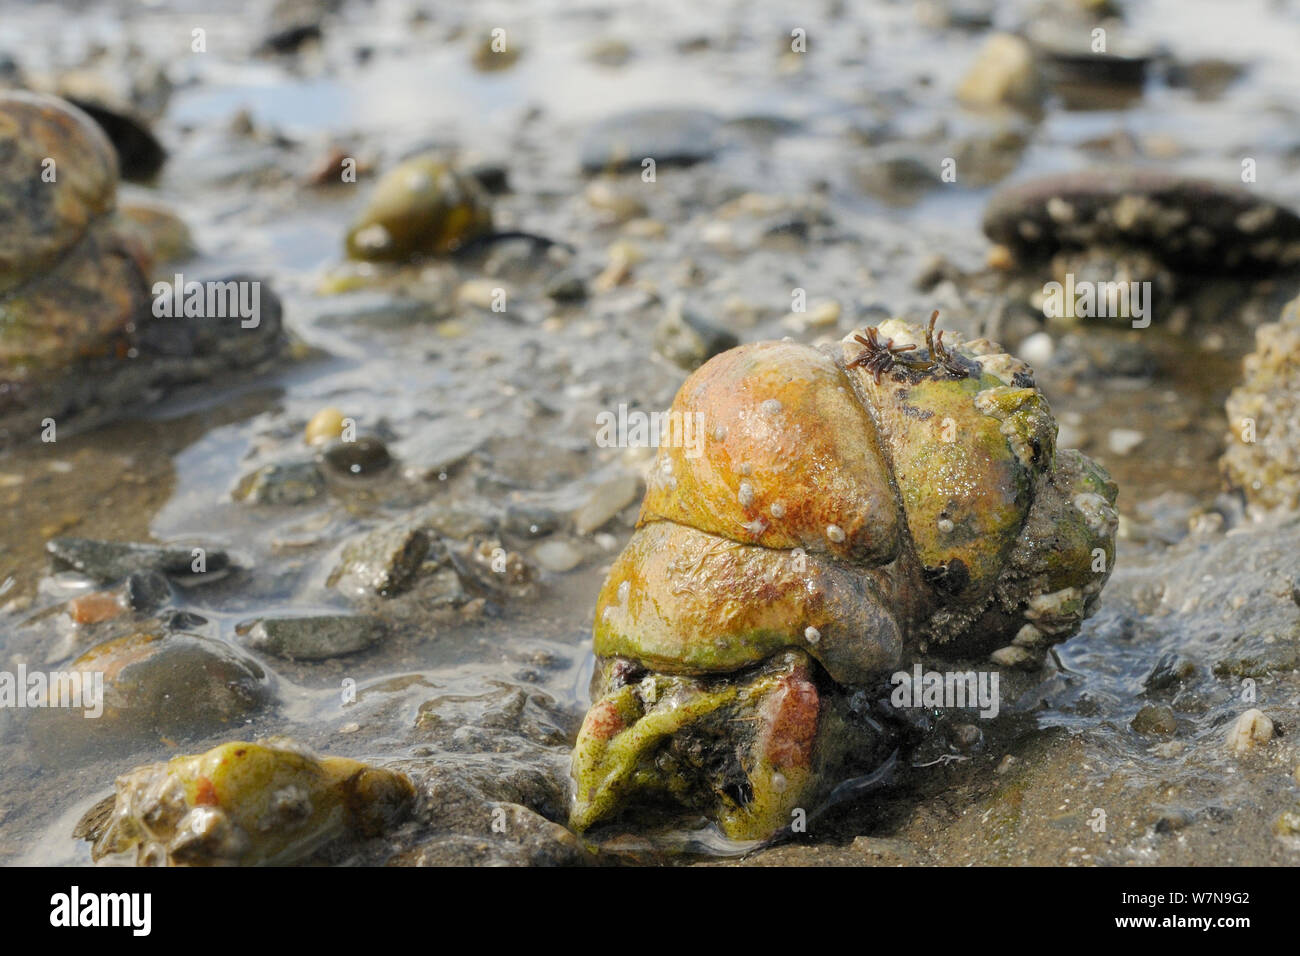 Four American slipper limpets (Crepidula fornicata), invasive pests of oyster beds in Europe, stacked on top of one another on mudflats, Helford River, Helford, Cornwall, UK, August. Stock Photo